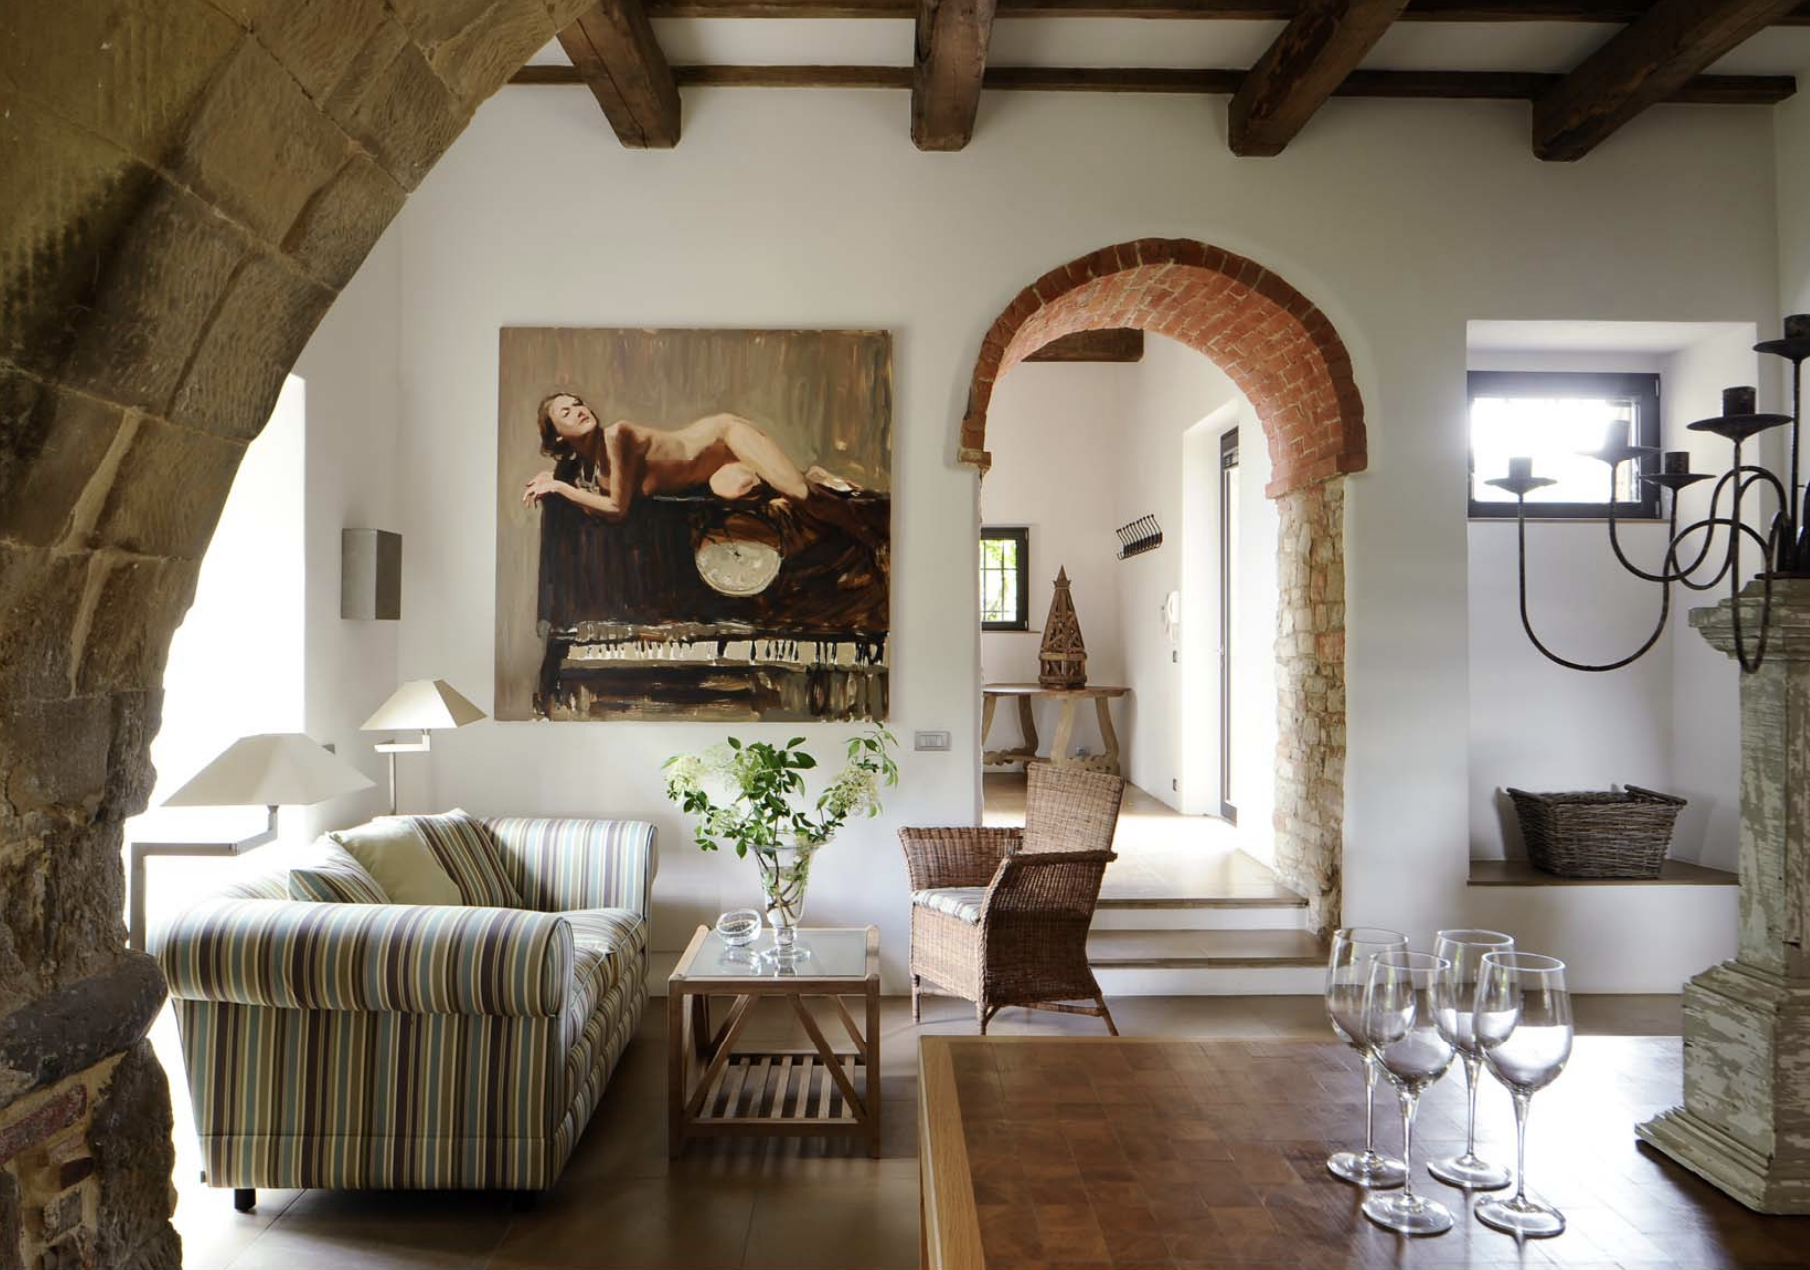 Francis+York+Villa Arrighi | Luxury Villa Rental on the Border of Umbria and Tuscany  00003.png